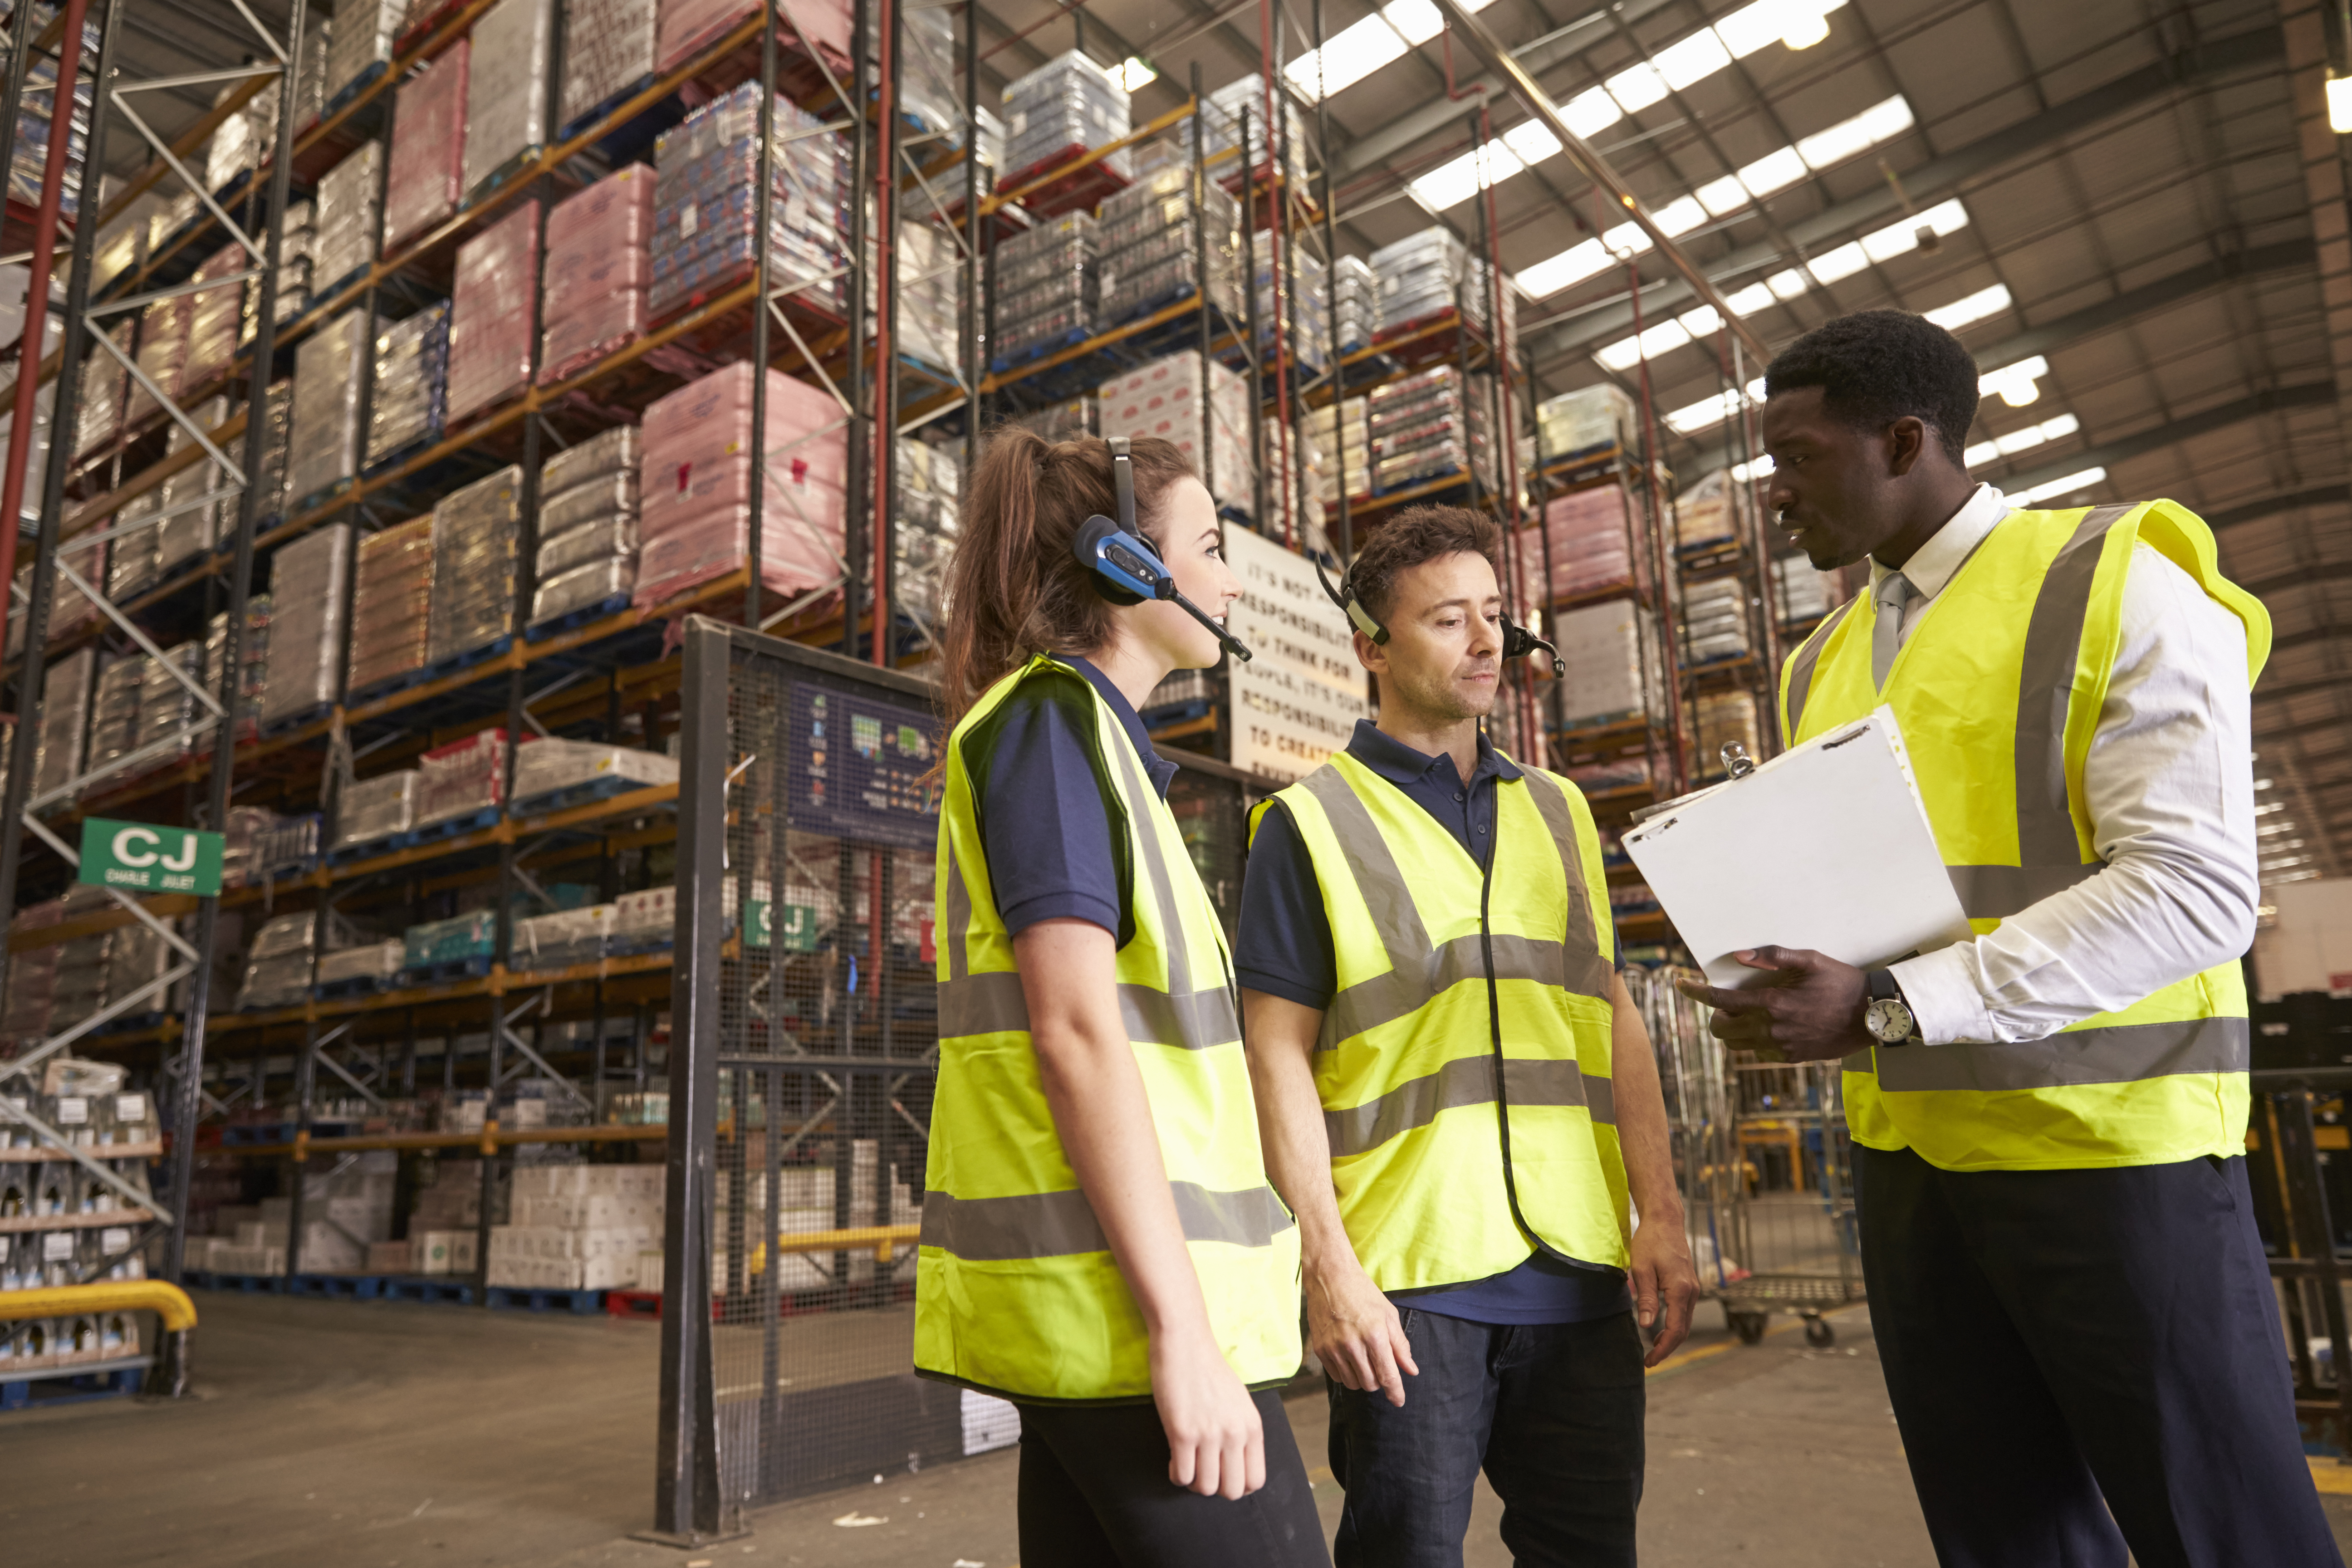 Distribution warehouse manager in discussion with colleagues